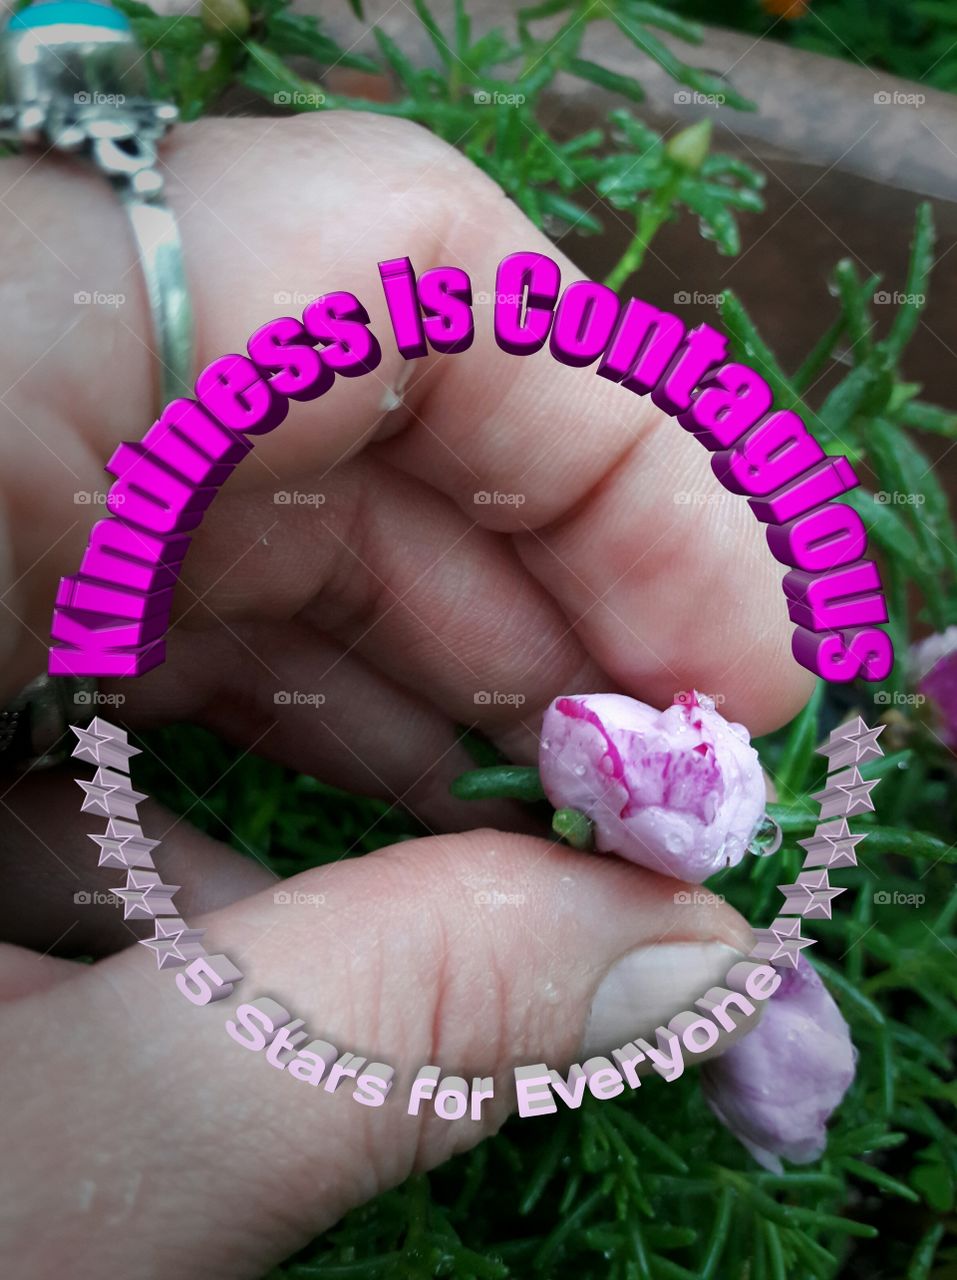 Kindness is Contagious ☆☆☆☆☆5 Stars for Everyone☆☆☆☆☆